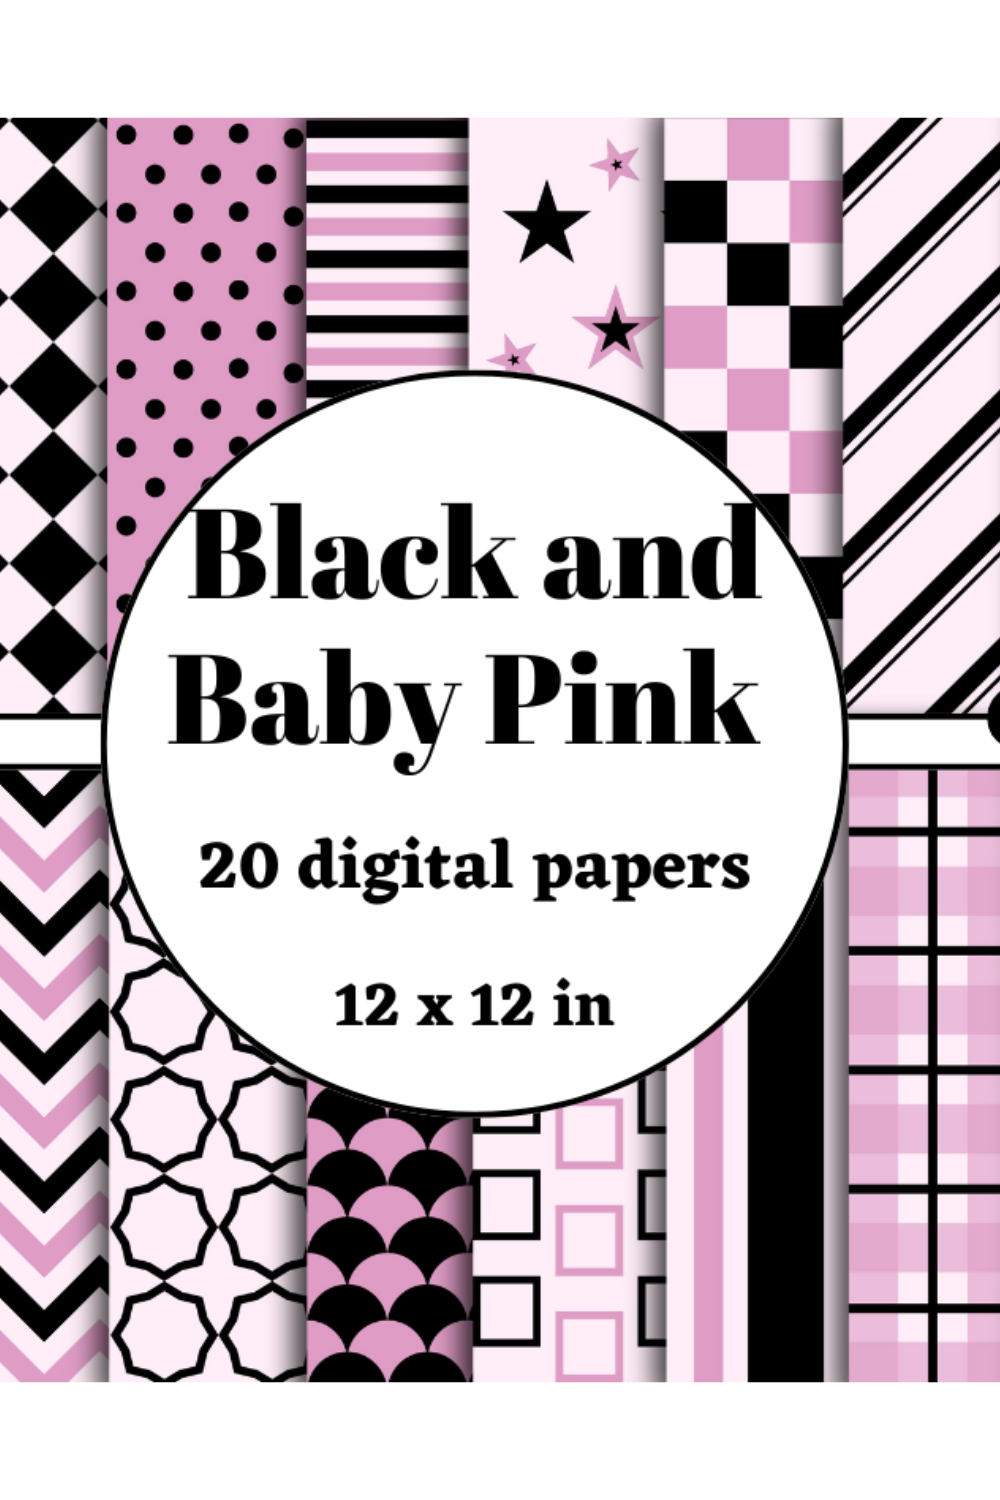 black and baby pink digital papers pinterest preview image.